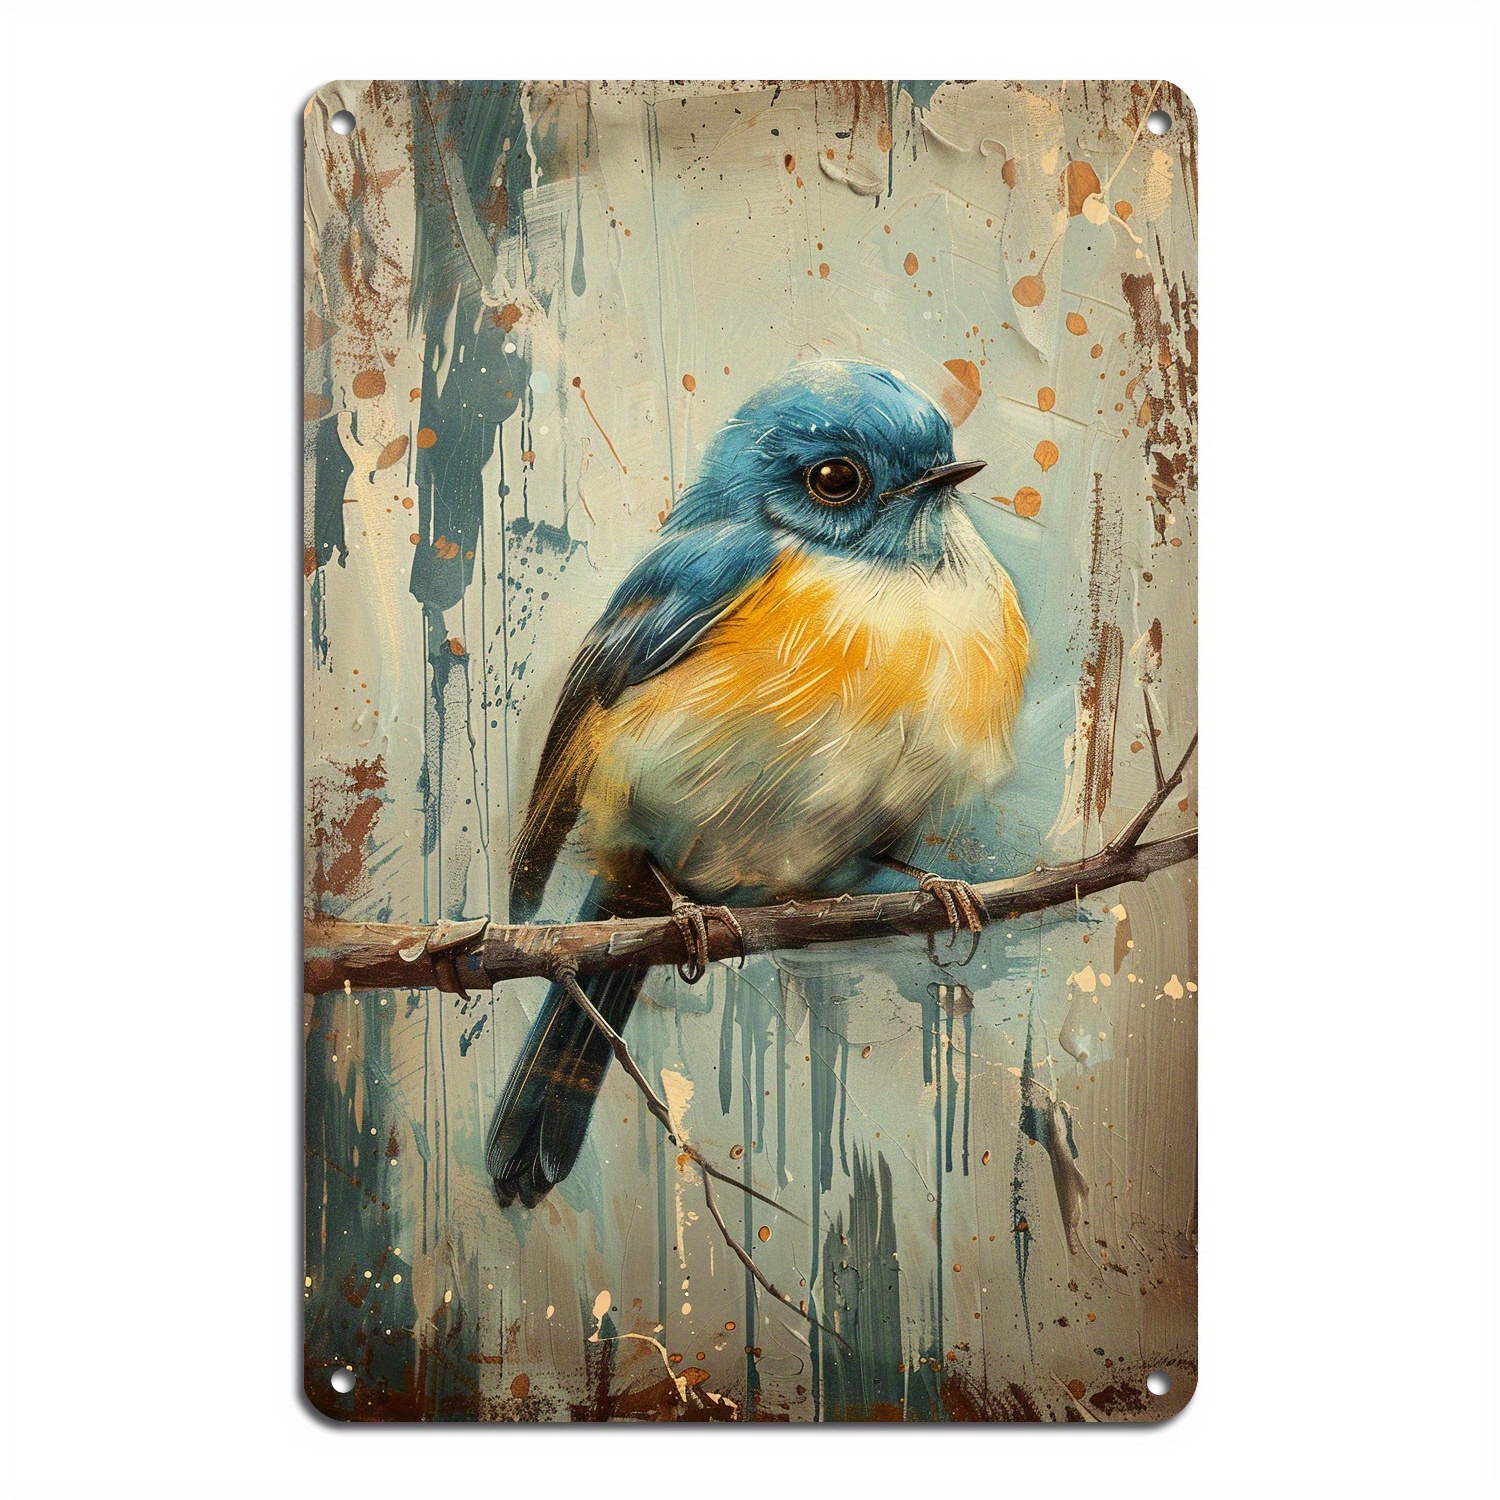 

1pc 8*12in Cute Bird Metal Tin Sign, Vintage Metal Poster, Wall Hanging Art, For Home Kitchen Dining Room Bedroom Garden Bathroom Garage Hotel Office Bakery Decor